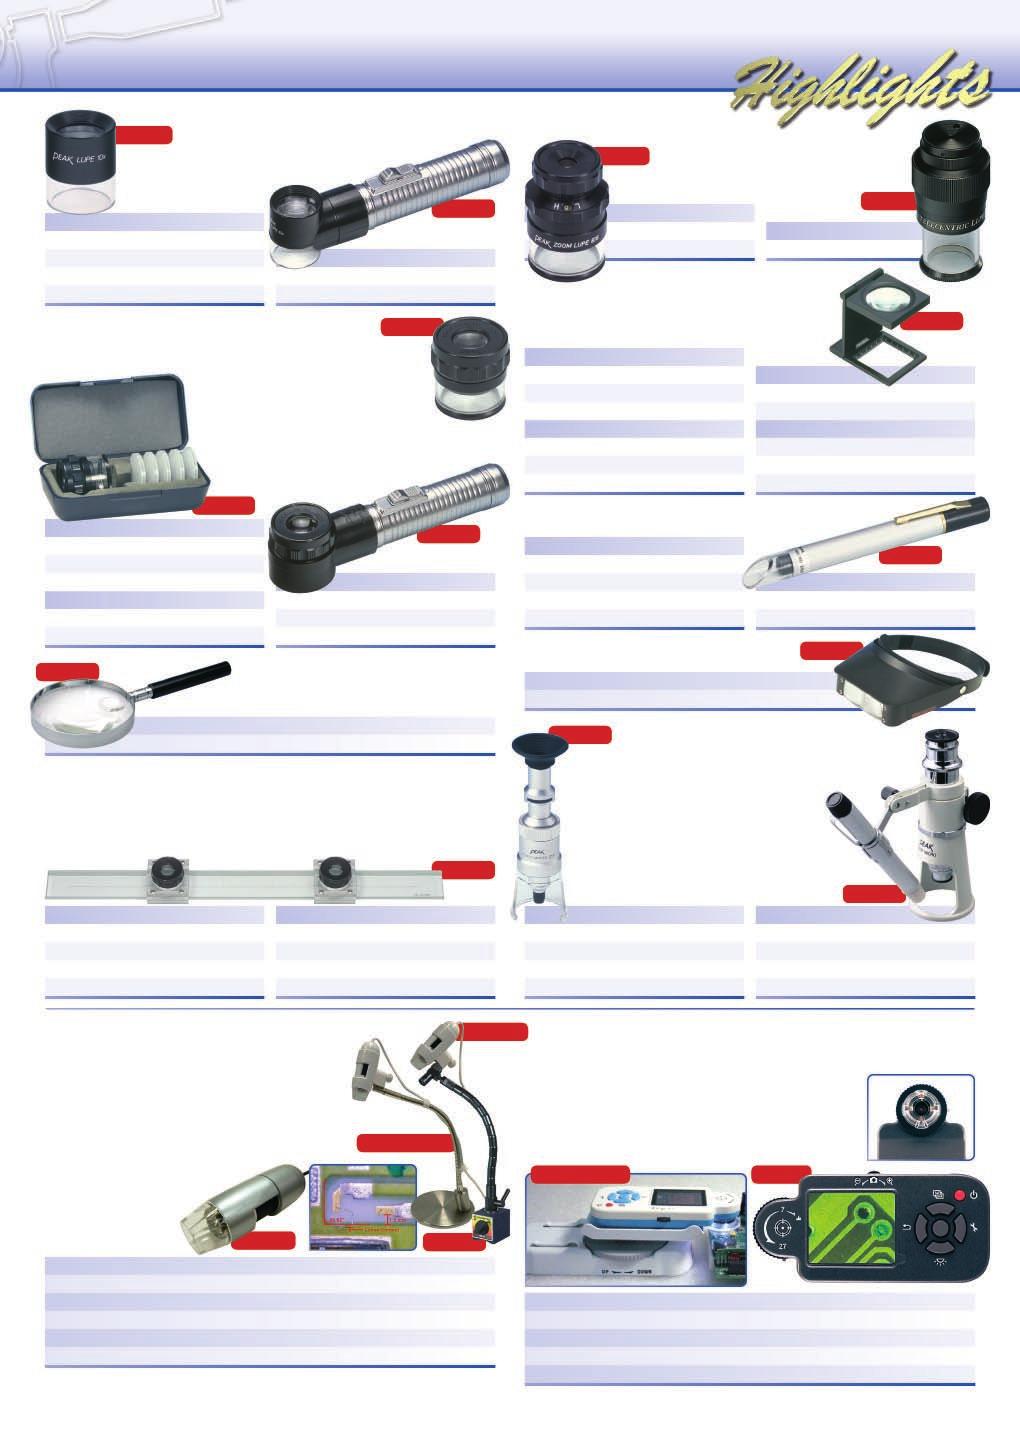 Magnifiers and microscopes 905.214 905.